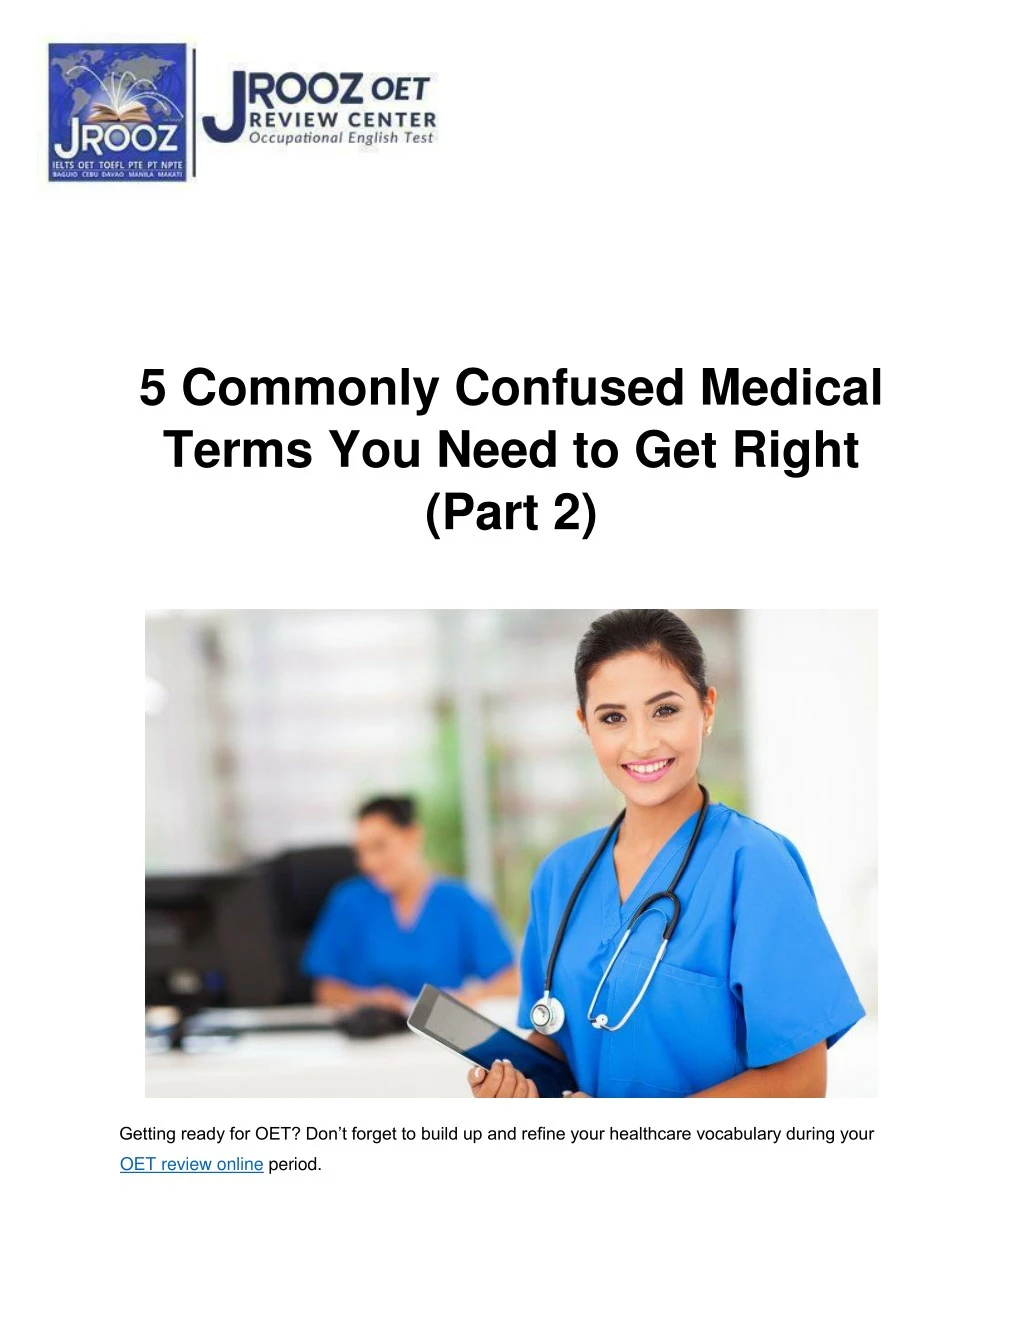 5 commonly confused medical terms you need